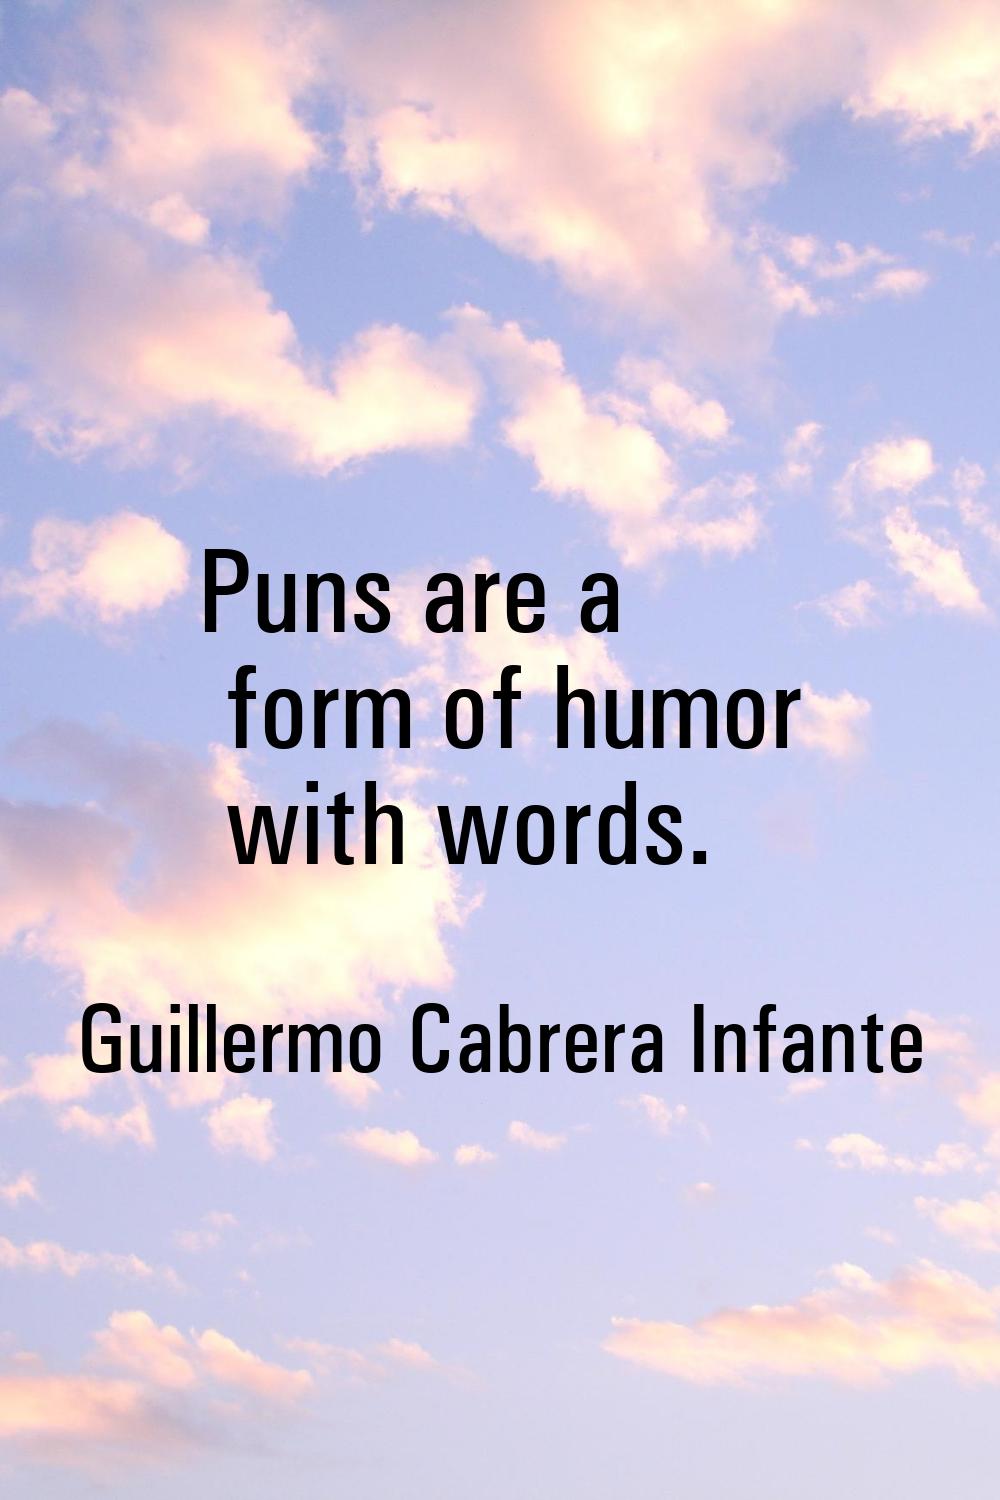 Puns are a form of humor with words.